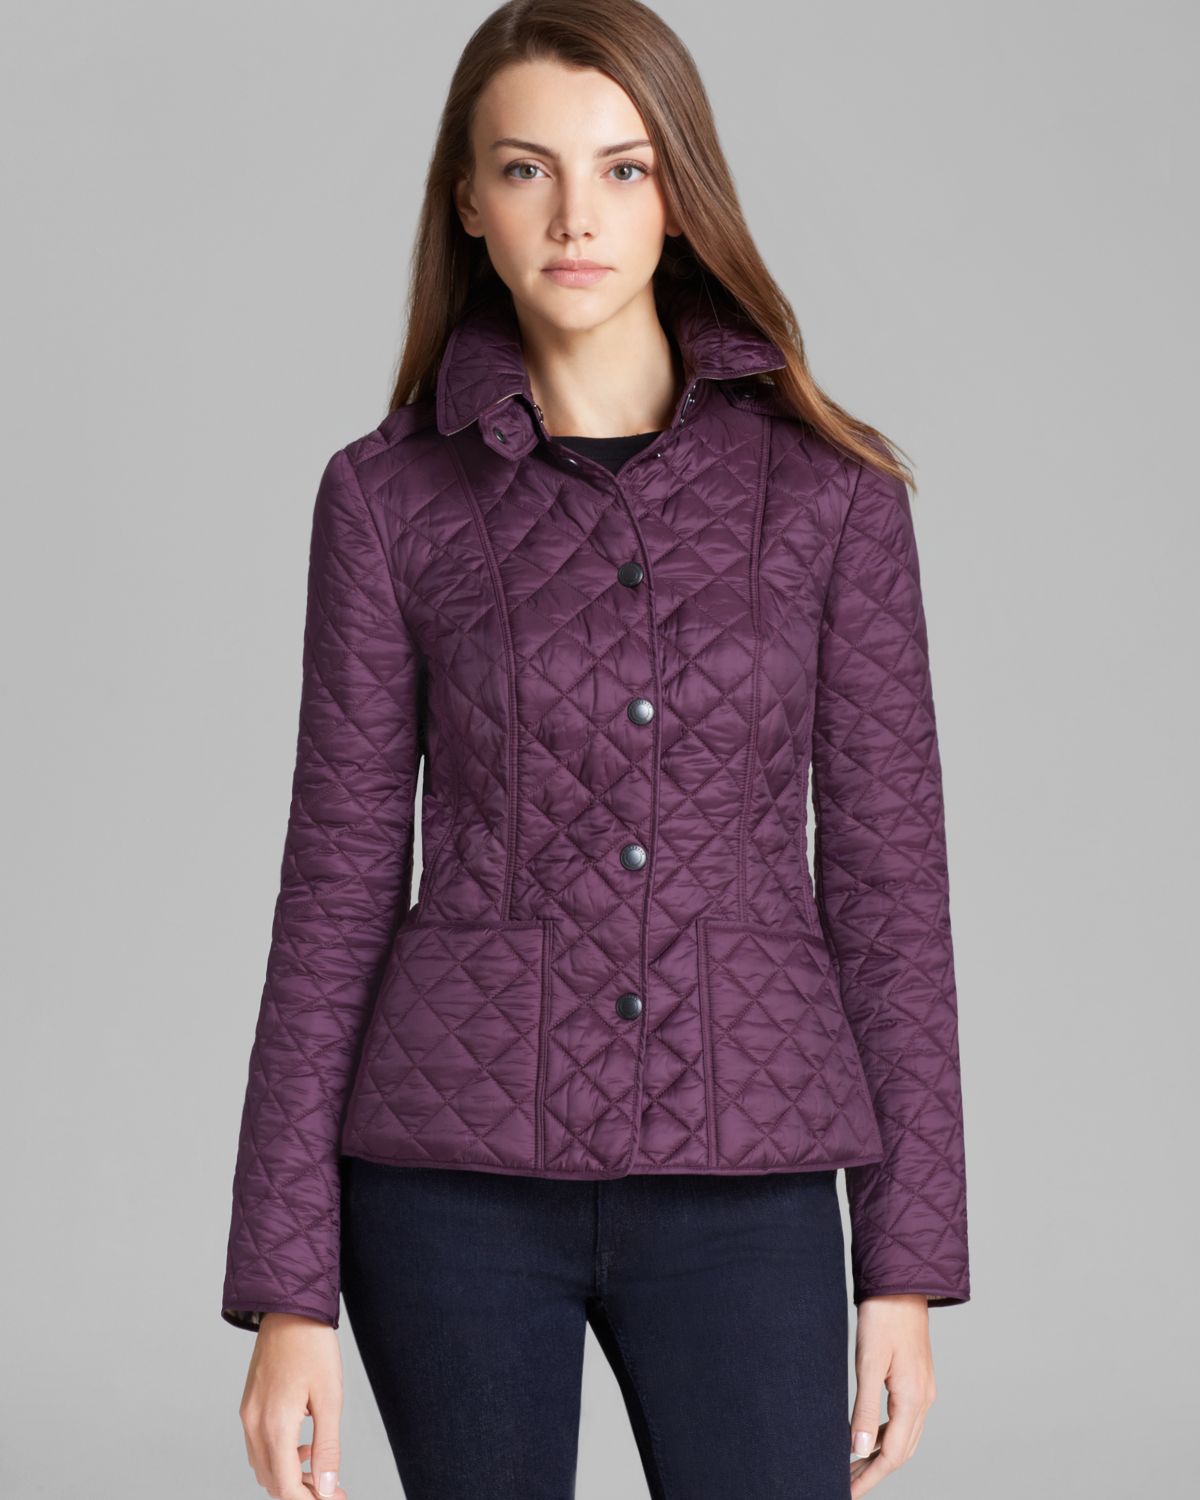 Lyst - Burberry Brit Kencott Quilted Jacket in Purple